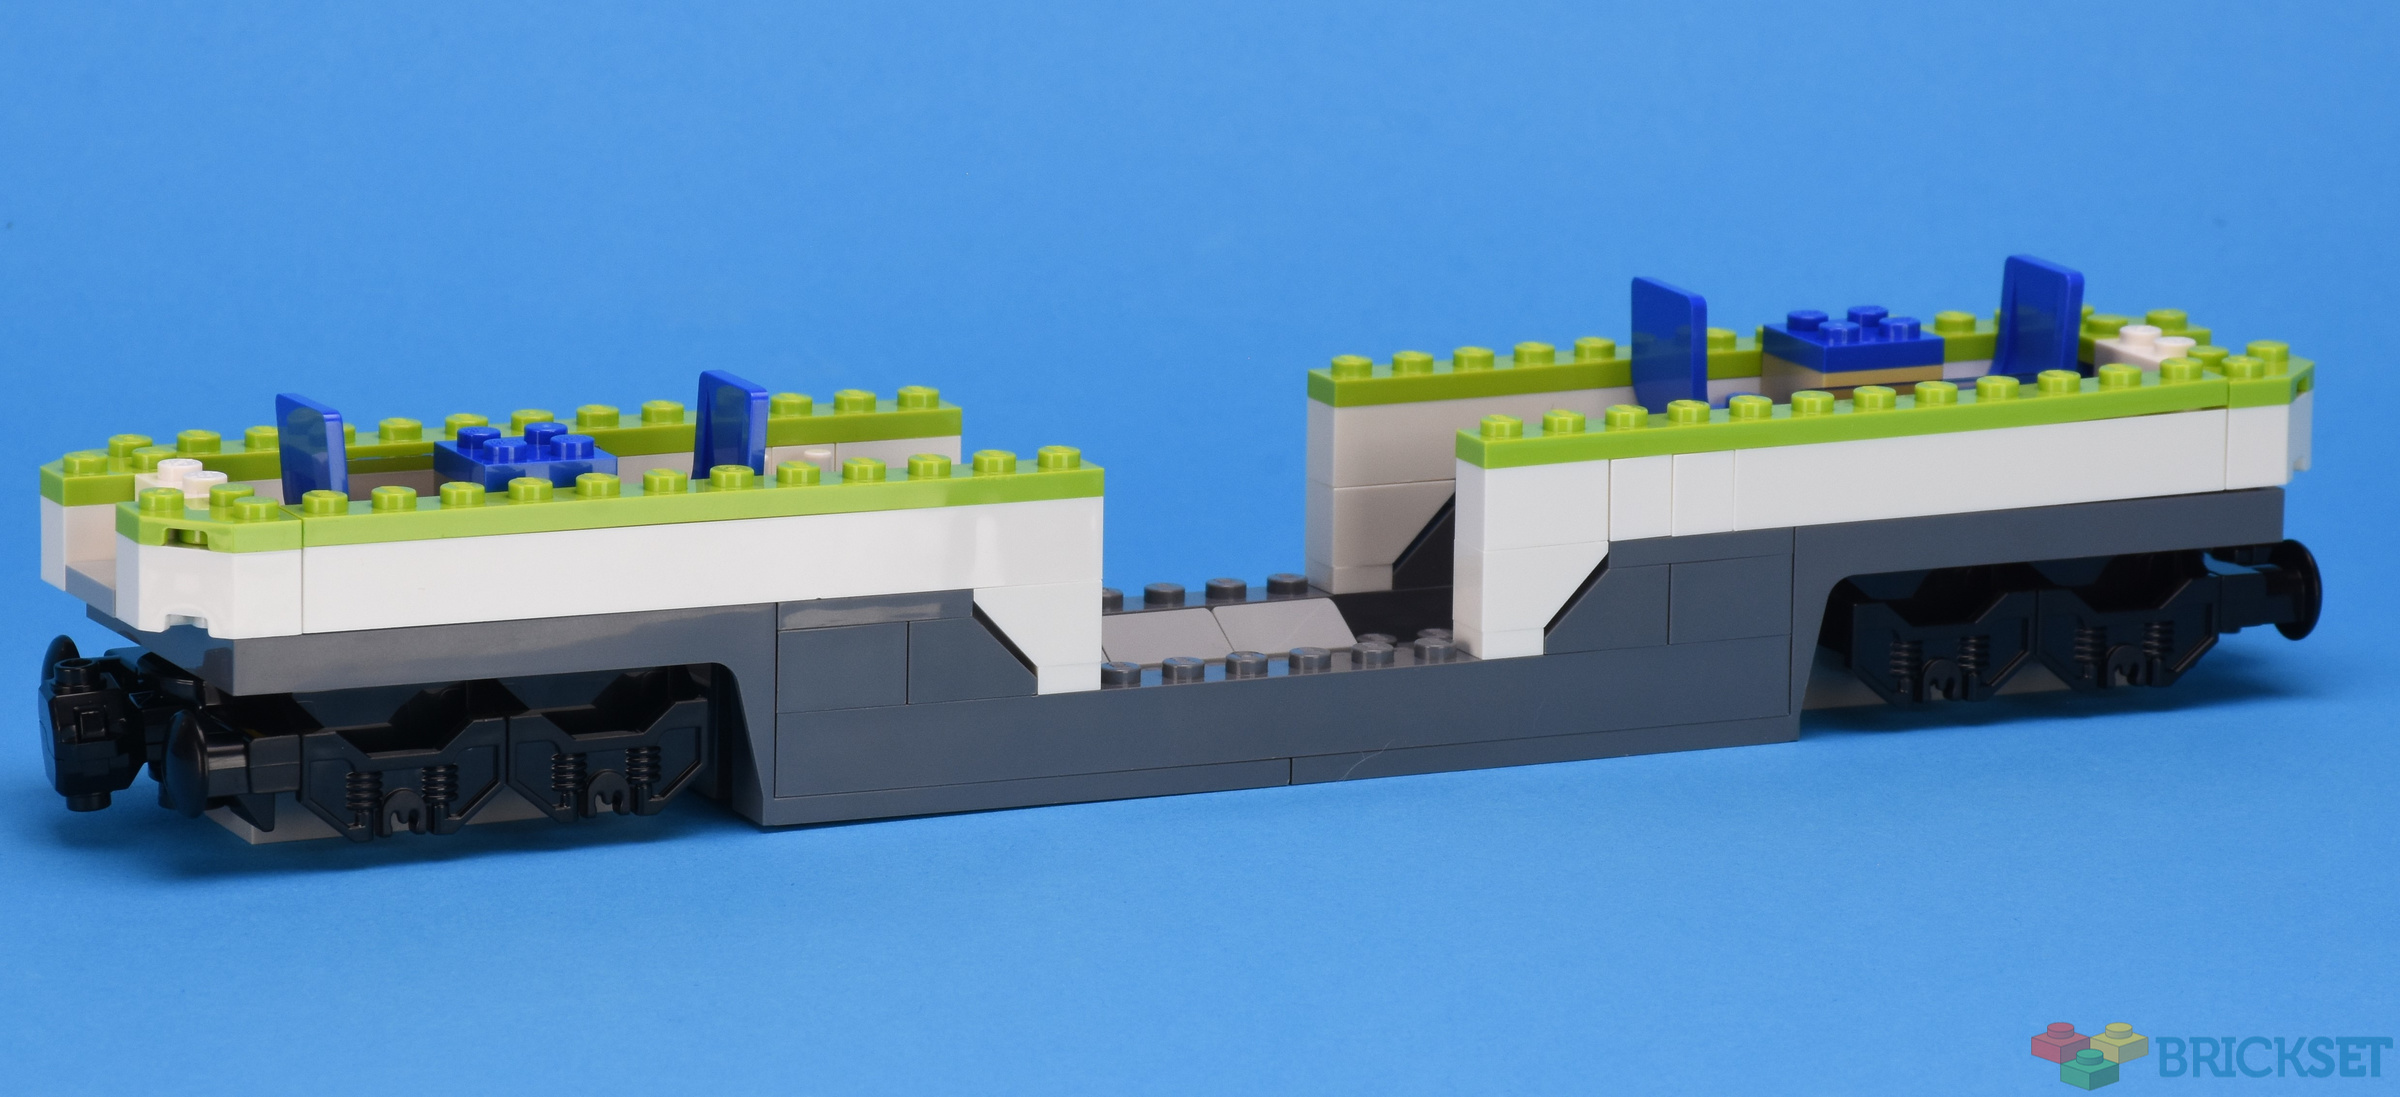 LEGO MOC Cars for Express Train 60337 by DemChing